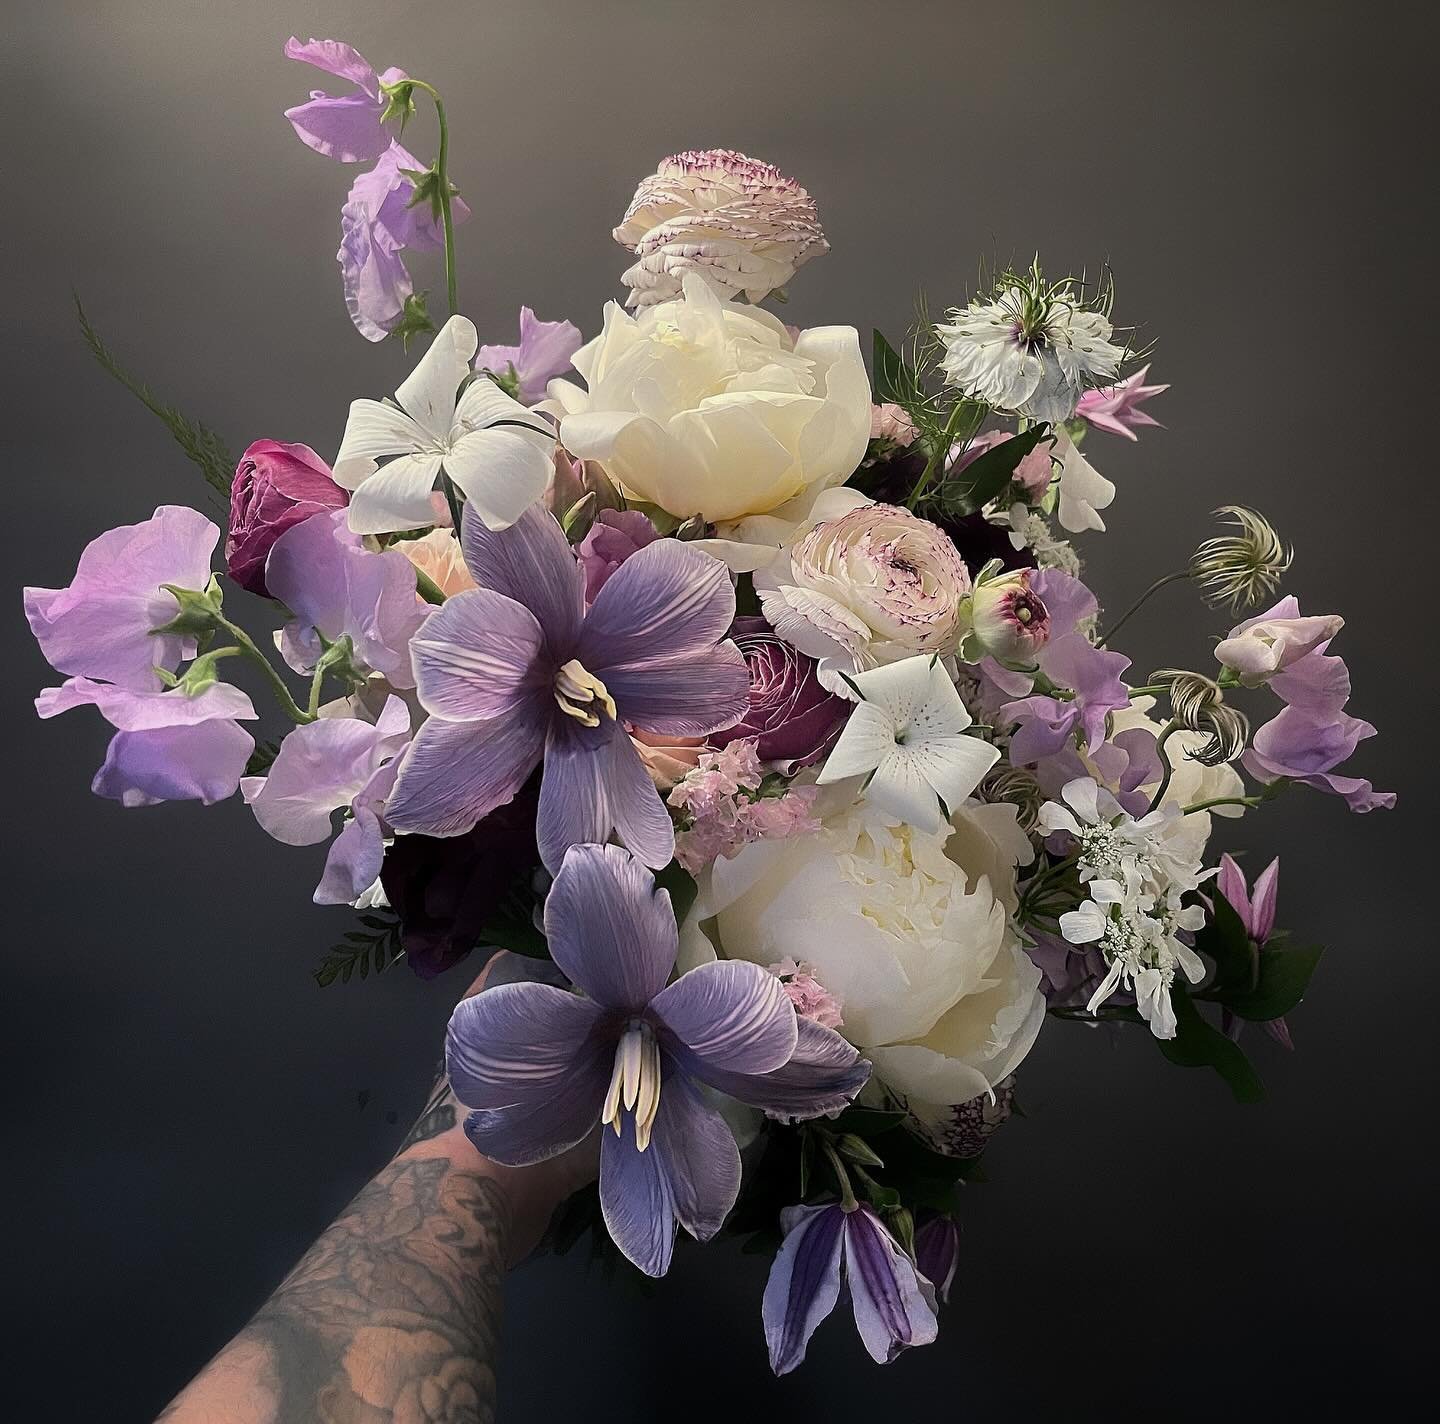 Bouquet for a past bride. Working on a proposals for June! Which means going back in my camera roll and seeing what we used this past summer to jog my memory for availability. #peonies #tulips #nigella #sweetpea #clematis #ranunculus